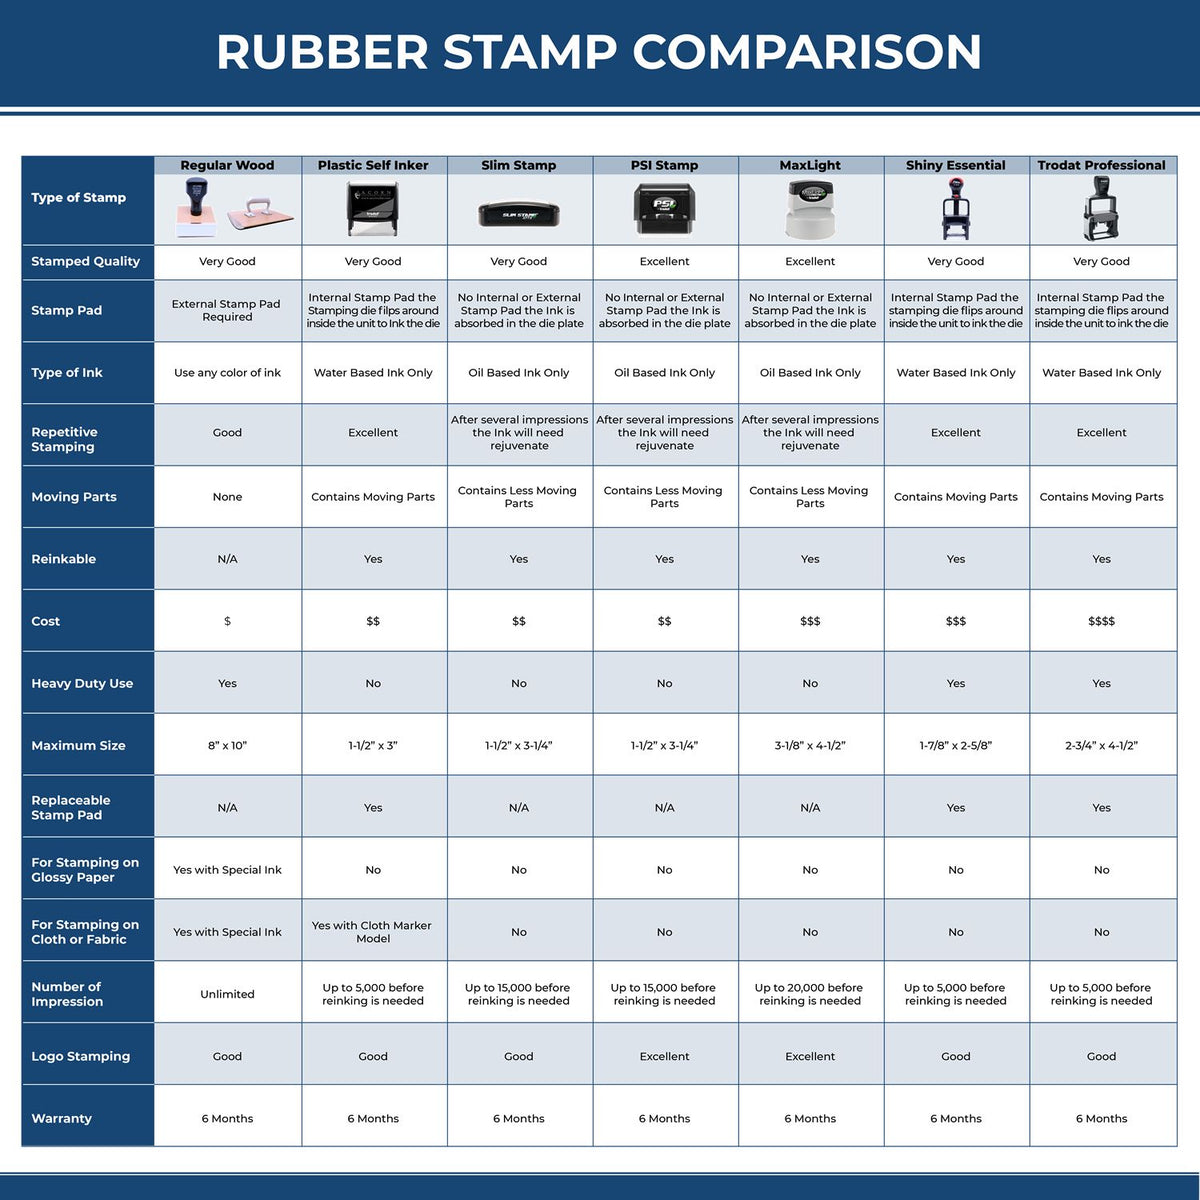 X-Rays Rubber Stamp 4456R Rubber Stamp Comparison